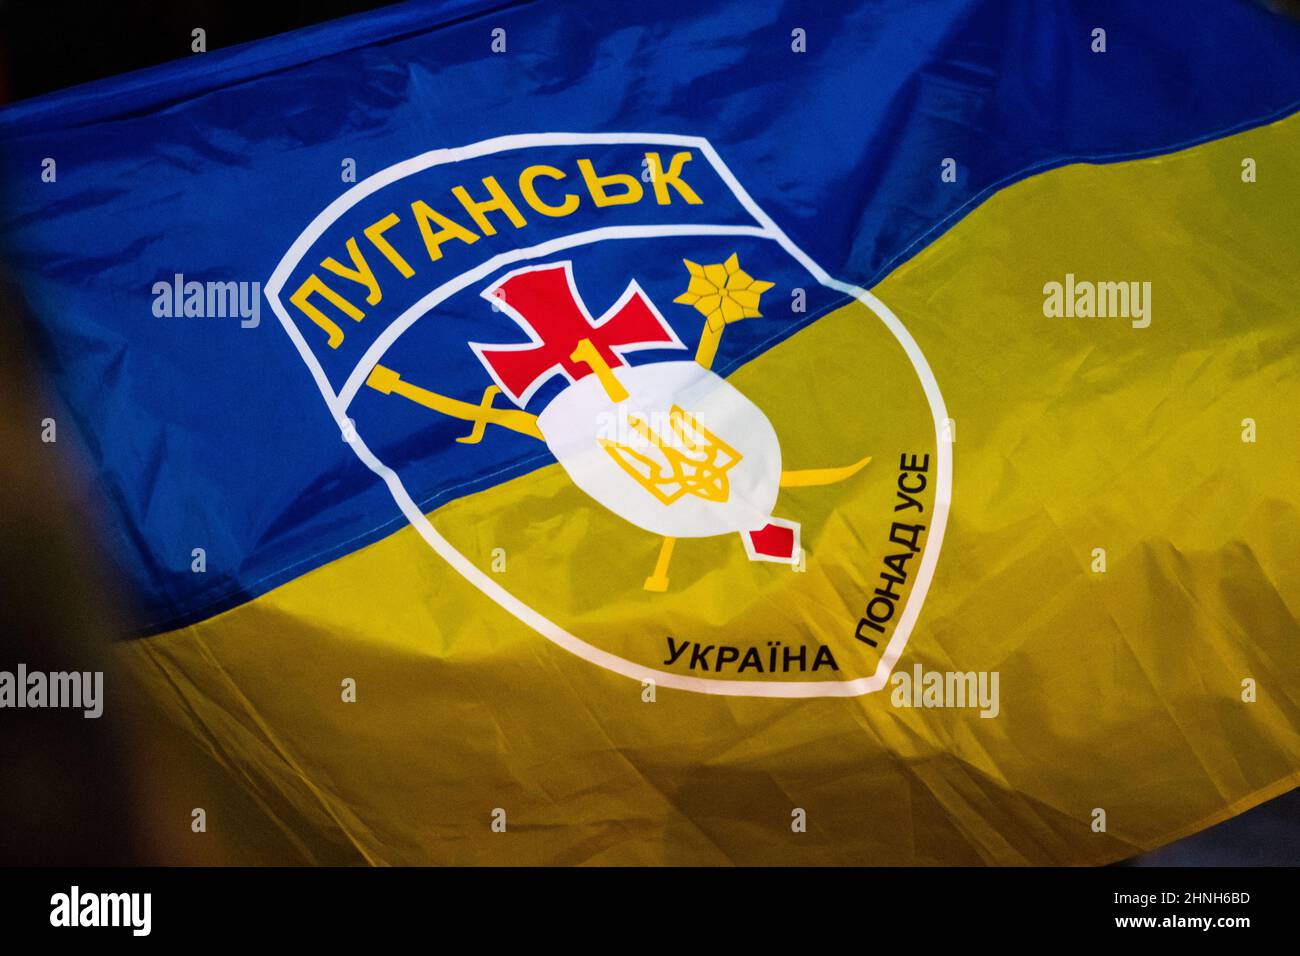 Flag of Ukraine above all with silhouette of symbol or logo of Luhansk or Lugansk city near the border with Russia in the disputed Donbass region Stock Photo